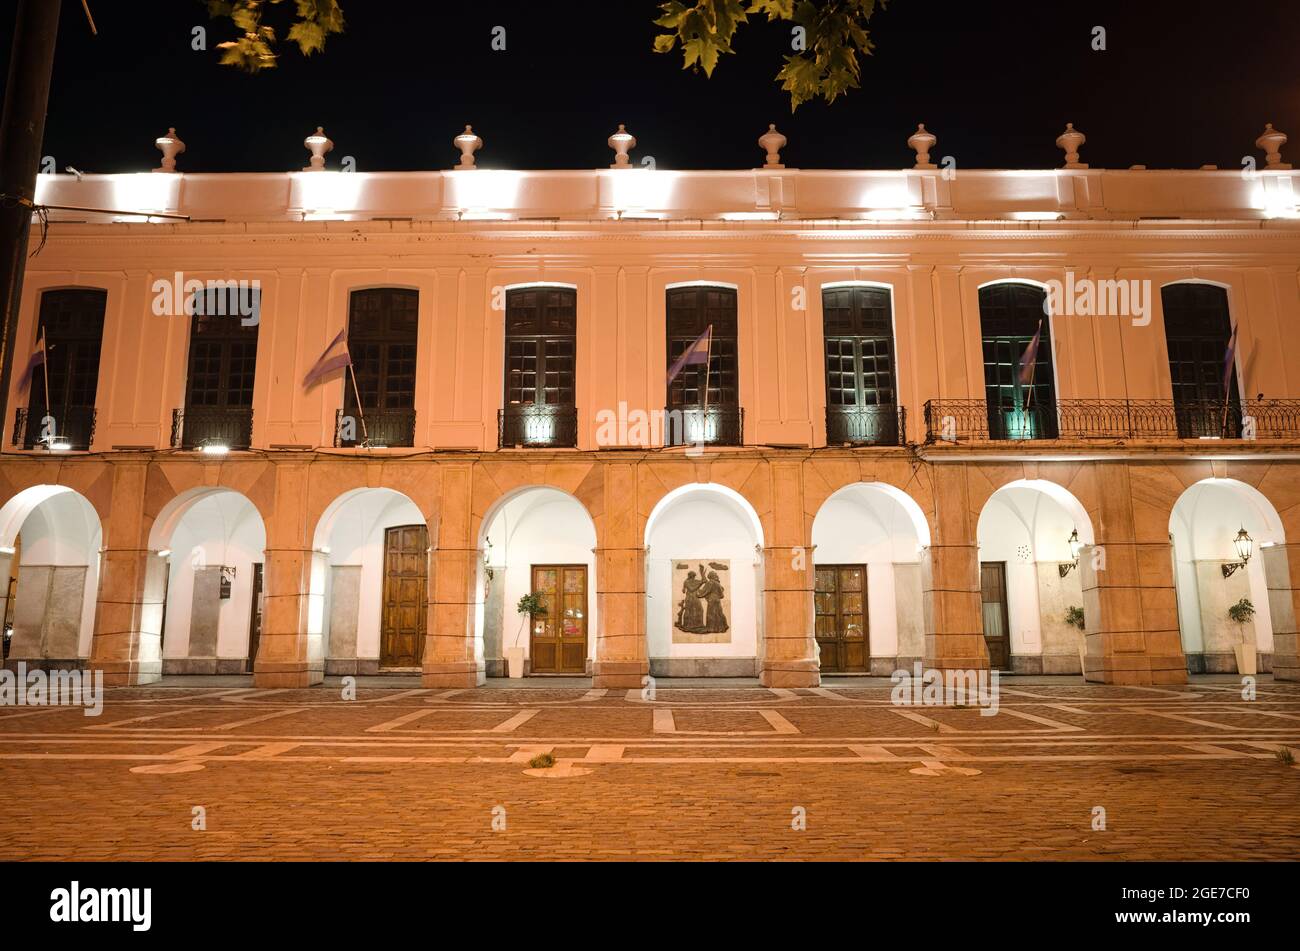 Cordoba, Argentina - January, 2020: Part of city hall of Cordoba building called Cabildo de Cordoba at night with lighting and Argentinian flags Stock Photo